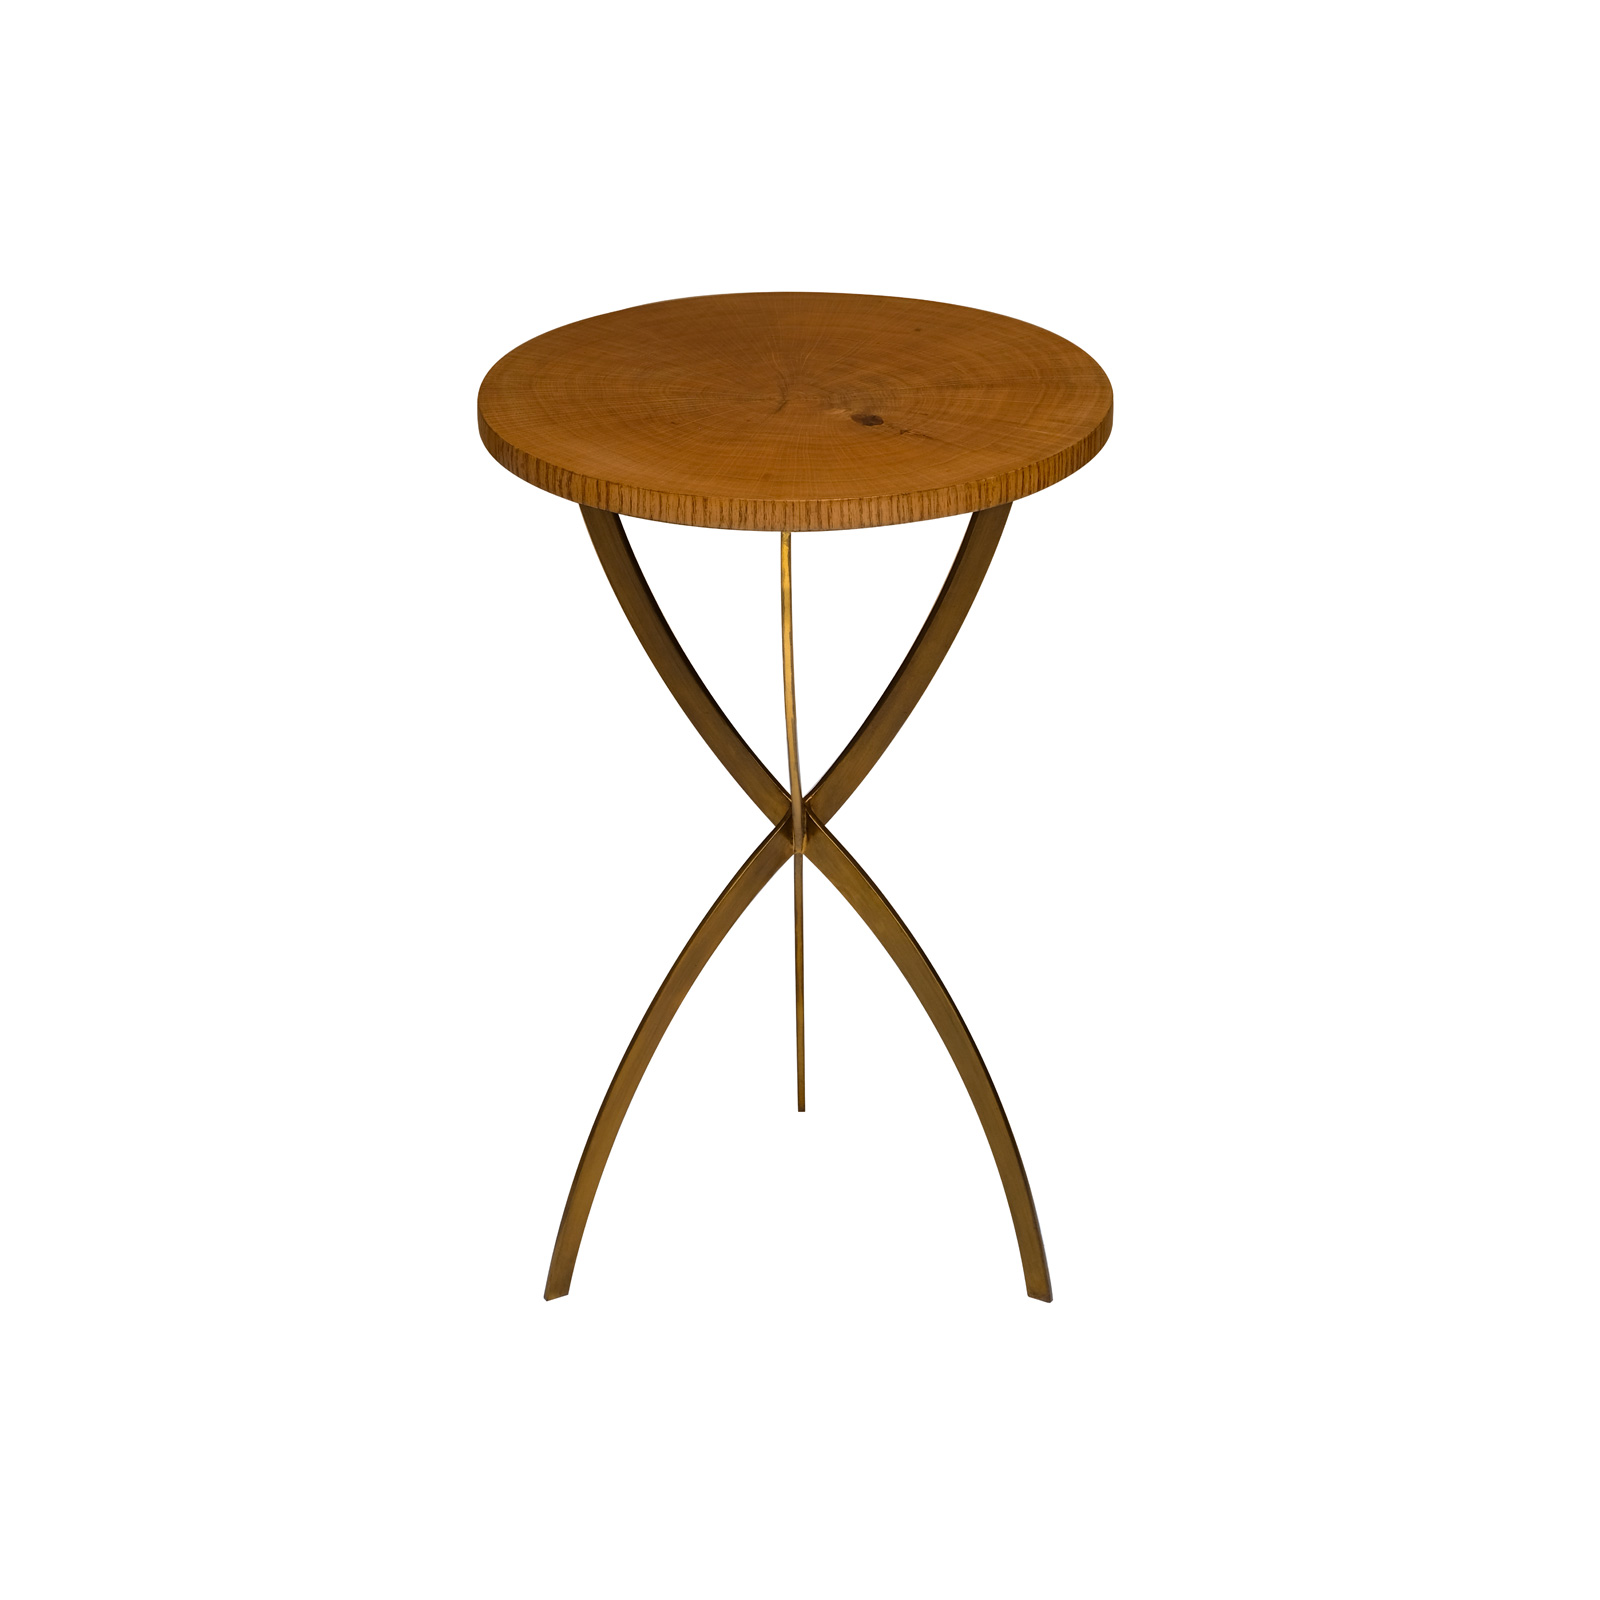 Shaped Wrought Iron Legs create a geometric design in the base of this spot table